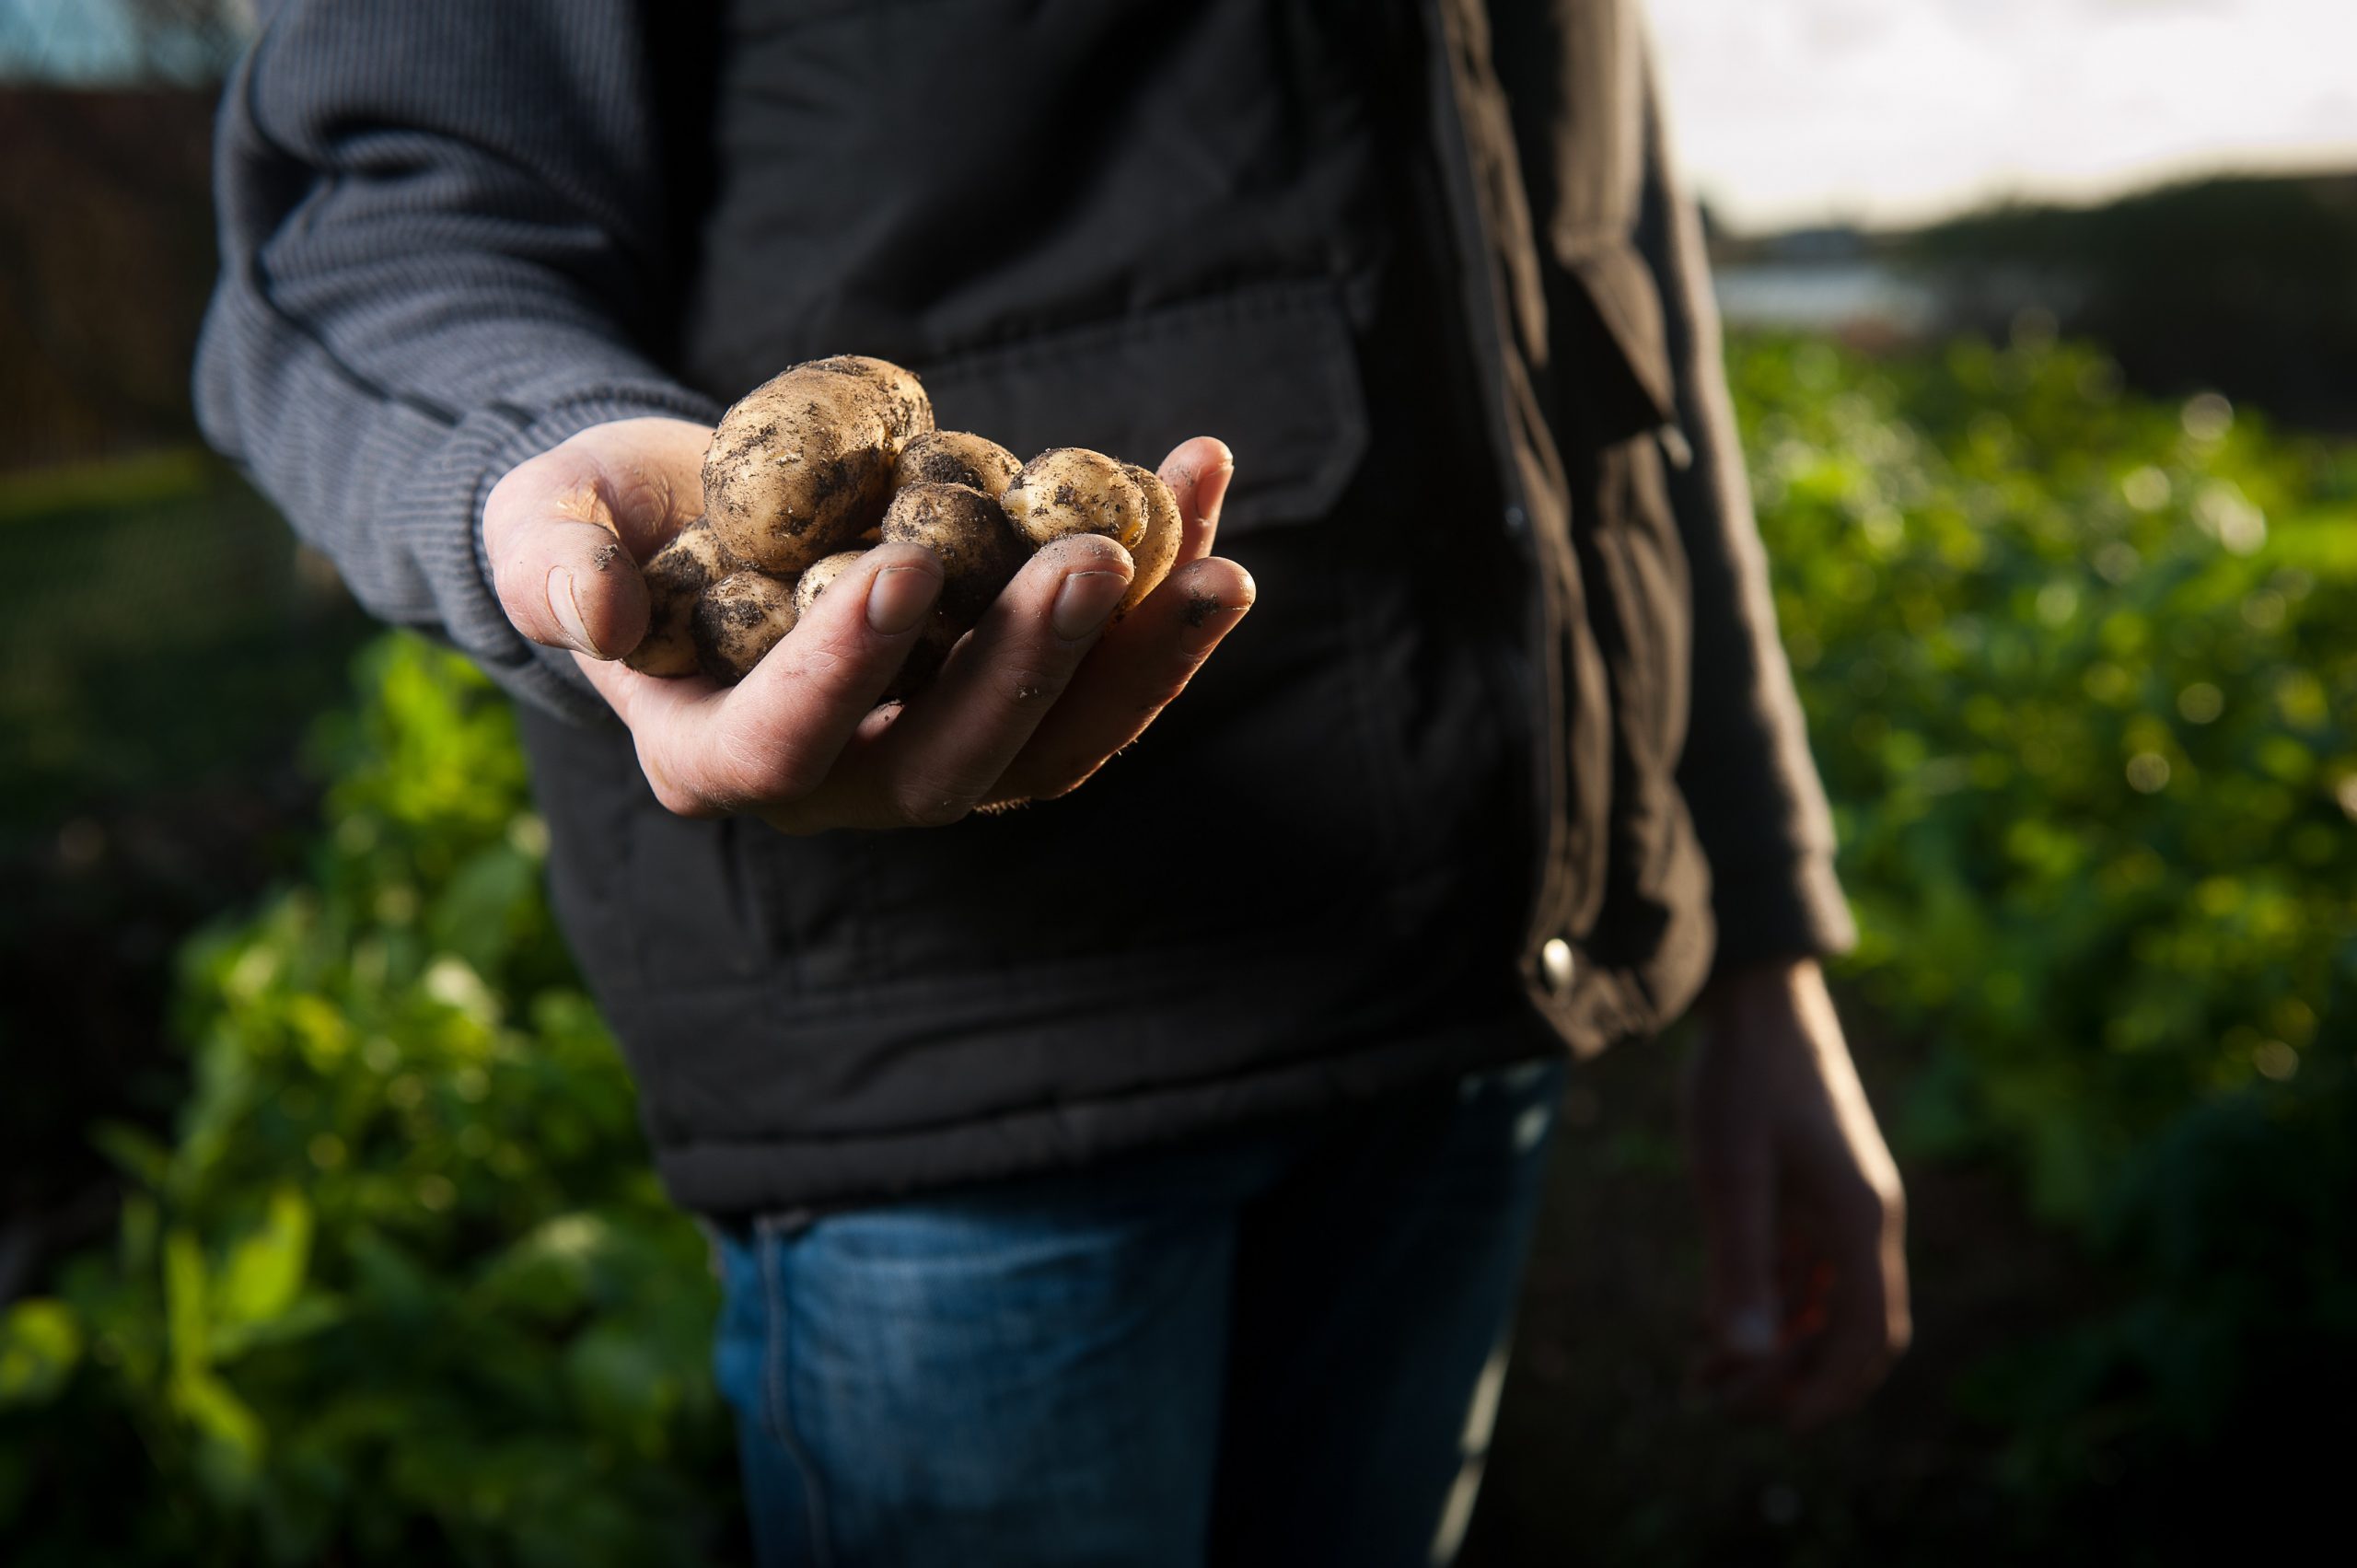 A man holding potatoes captioned “Creating a just, sustainable, and resilient food system for the entire New England region”